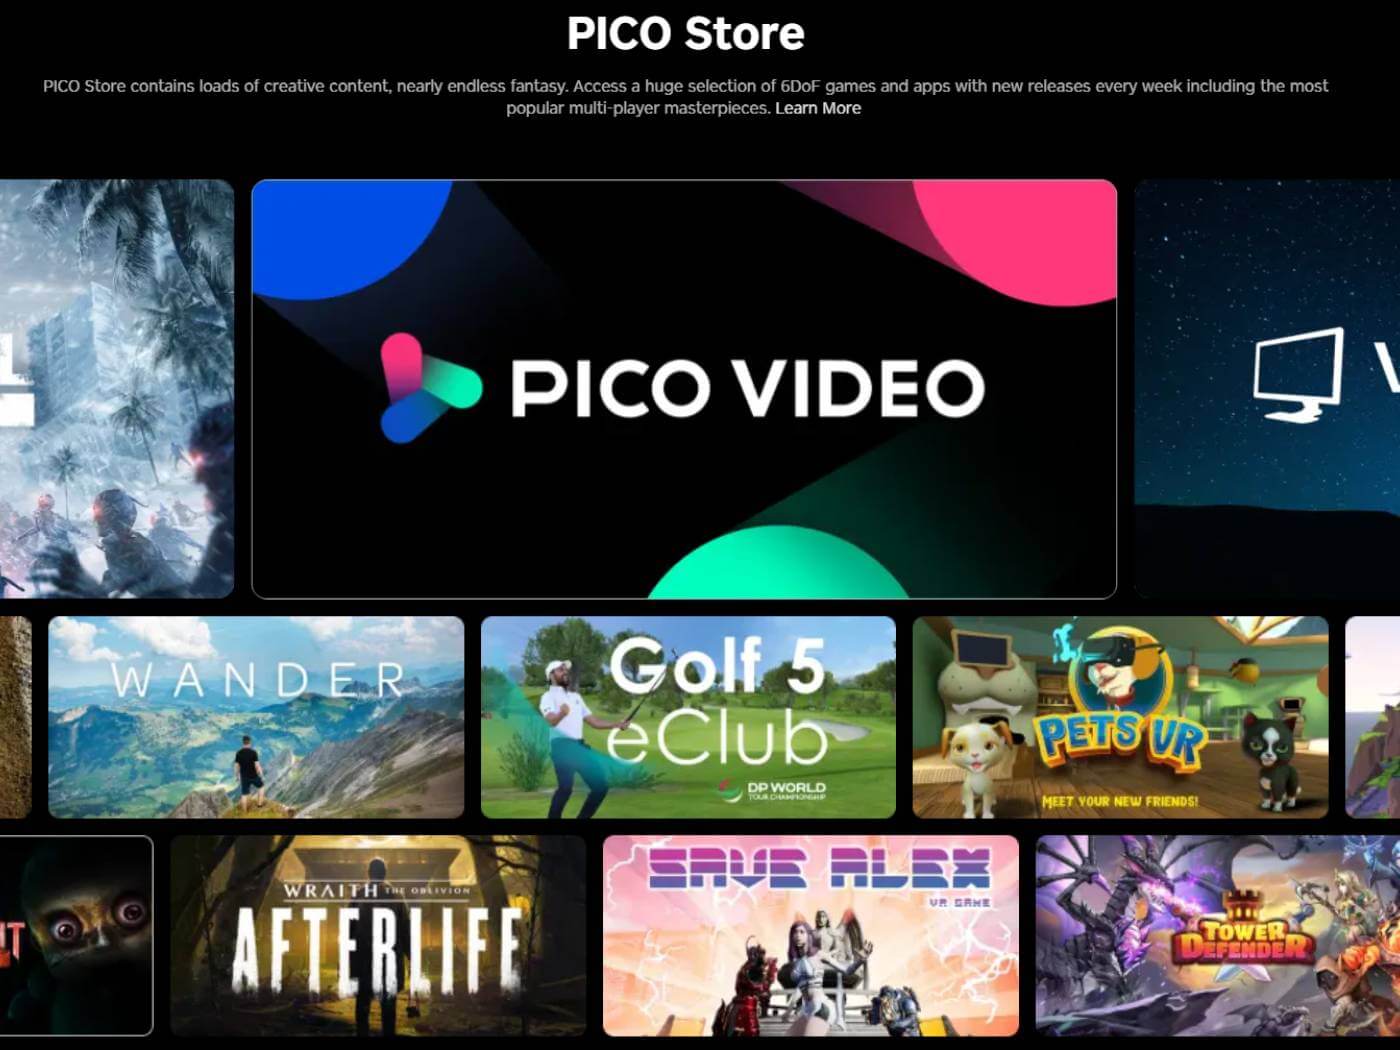 Best Pico 4 VR Games - An Ultimate Guide to Immersive Gaming